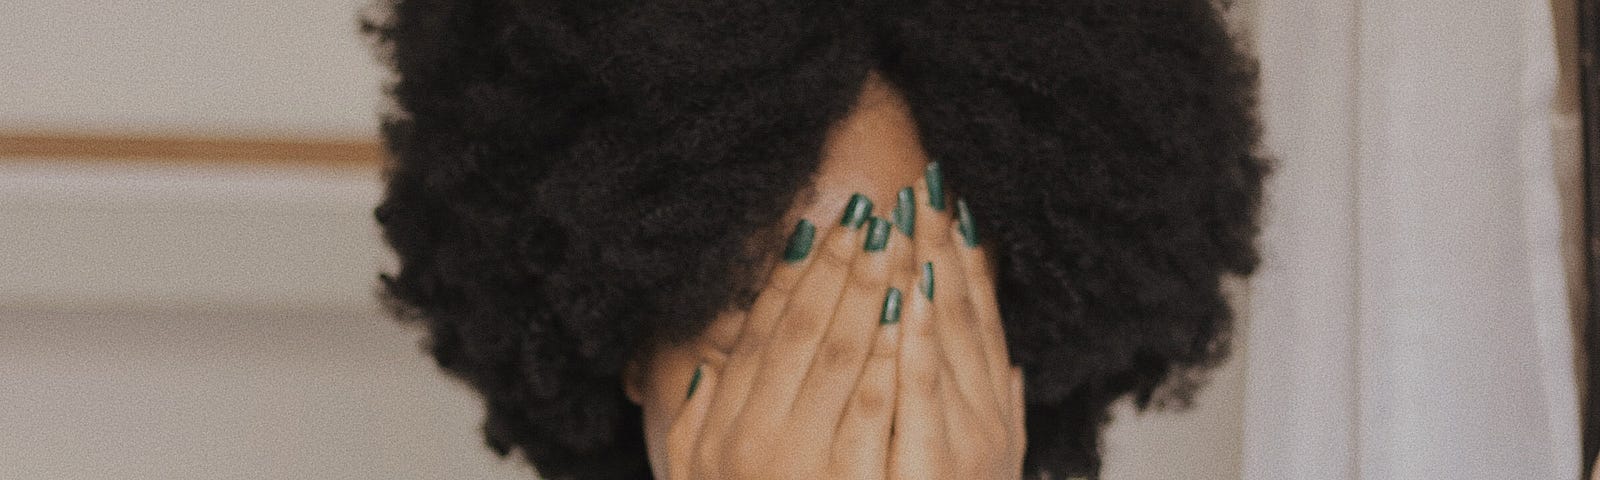 Black woman covering her face with her hands.